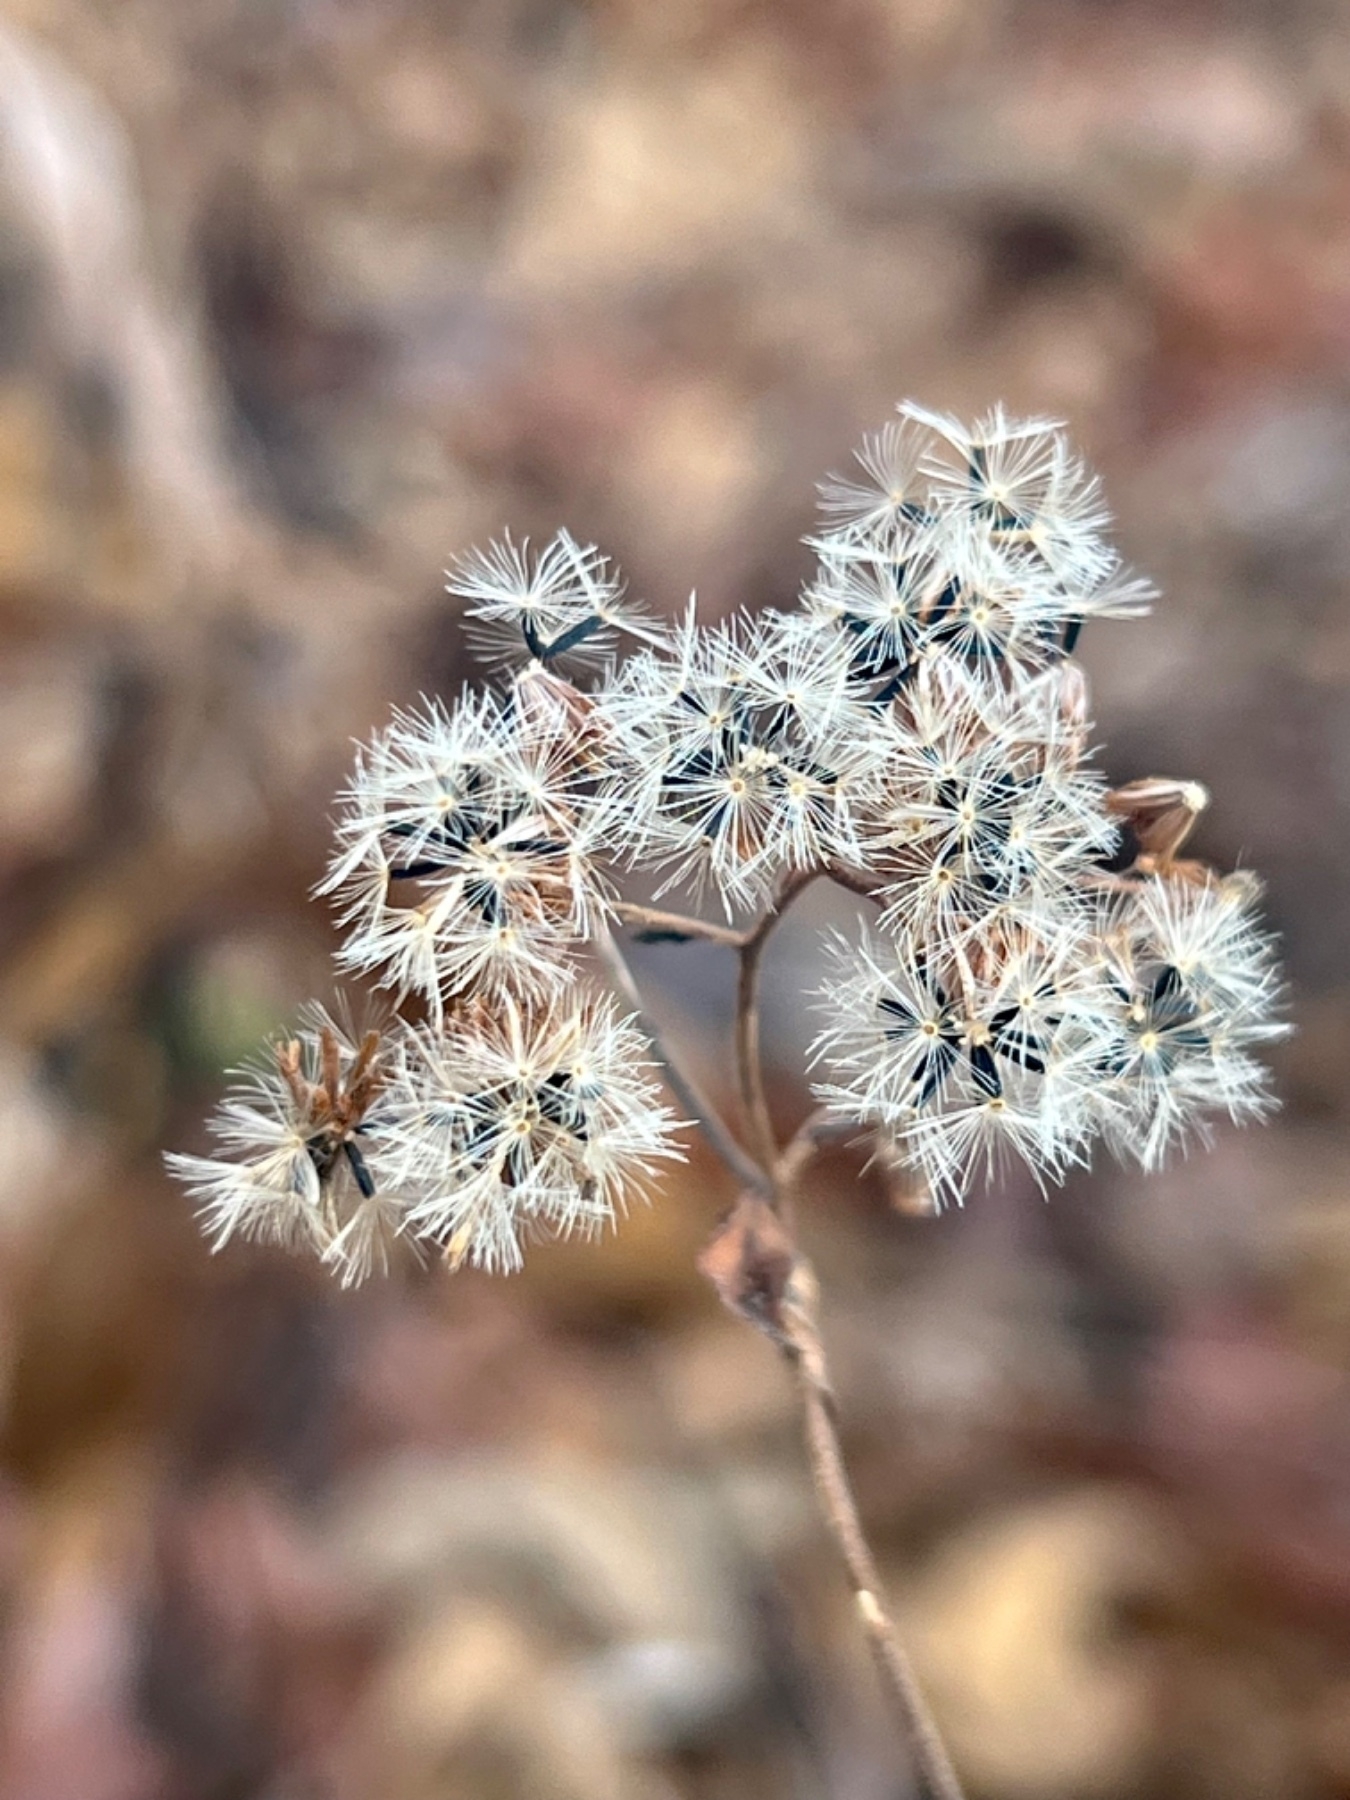 A custer of flowers have turned golden brown for the winter. Amongst the remaining flower parts are many small seeds are still attached. The seeds have an elongated black base with tiny white, feathery tendrils to catch the wind. 